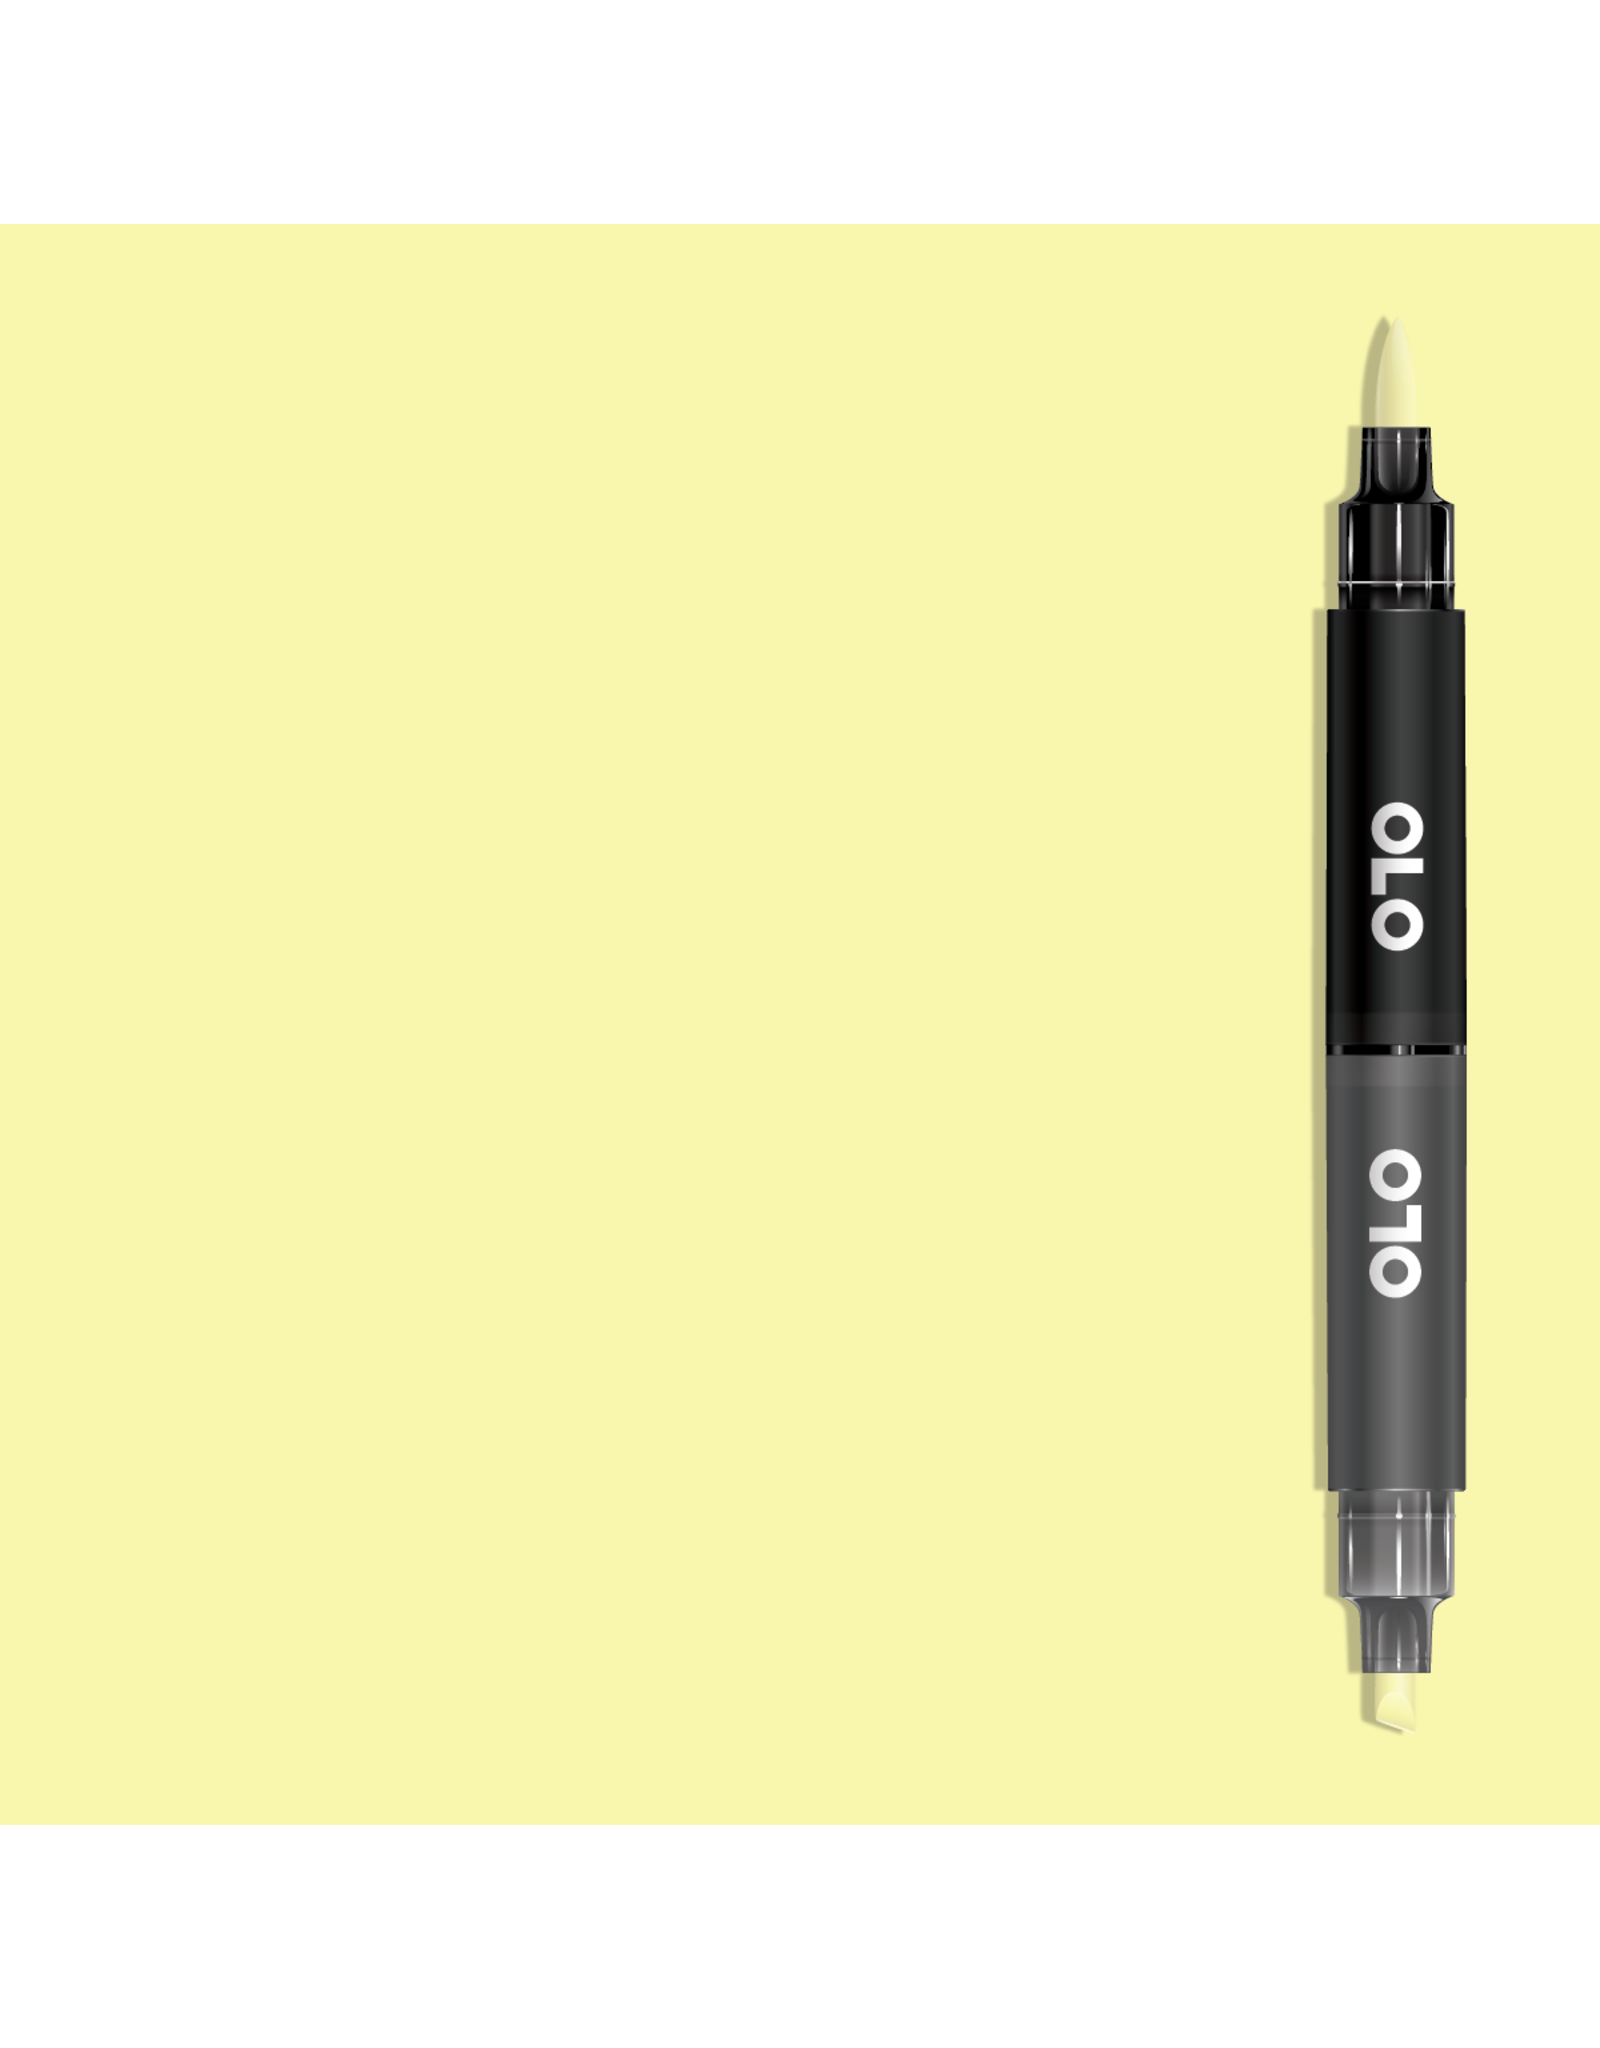 CLEARANCE OLO Marker, Y1.1 Ginger